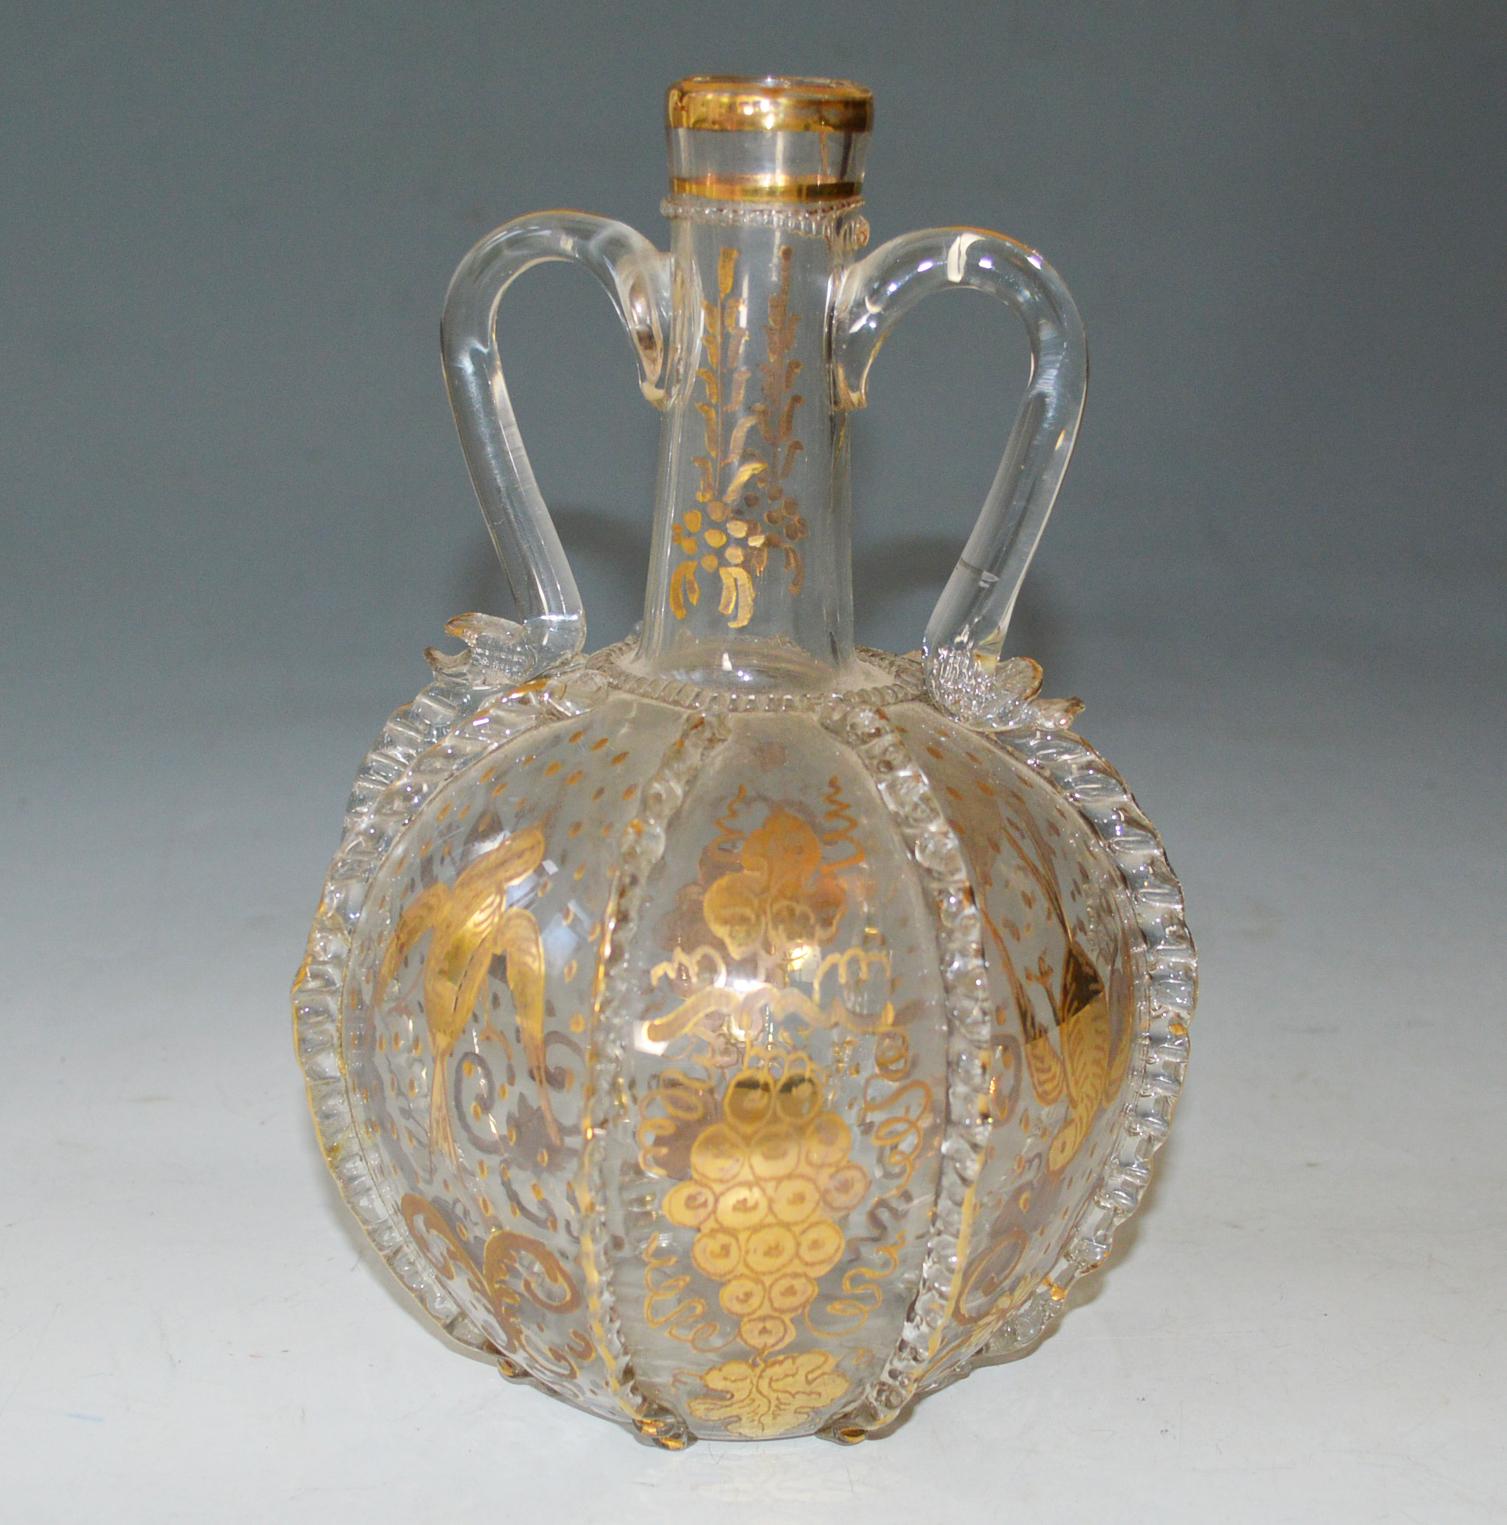 A Interesting rare Antique Dutch Blown Glass Bridal Bottle or Carafe Decanter with  Gold painted decoration.
Traditionally given as a Bridal gift 

Circa: 18th/ early 19th Century.

 Item condition: Fine condition with only  one tiny hardly visible